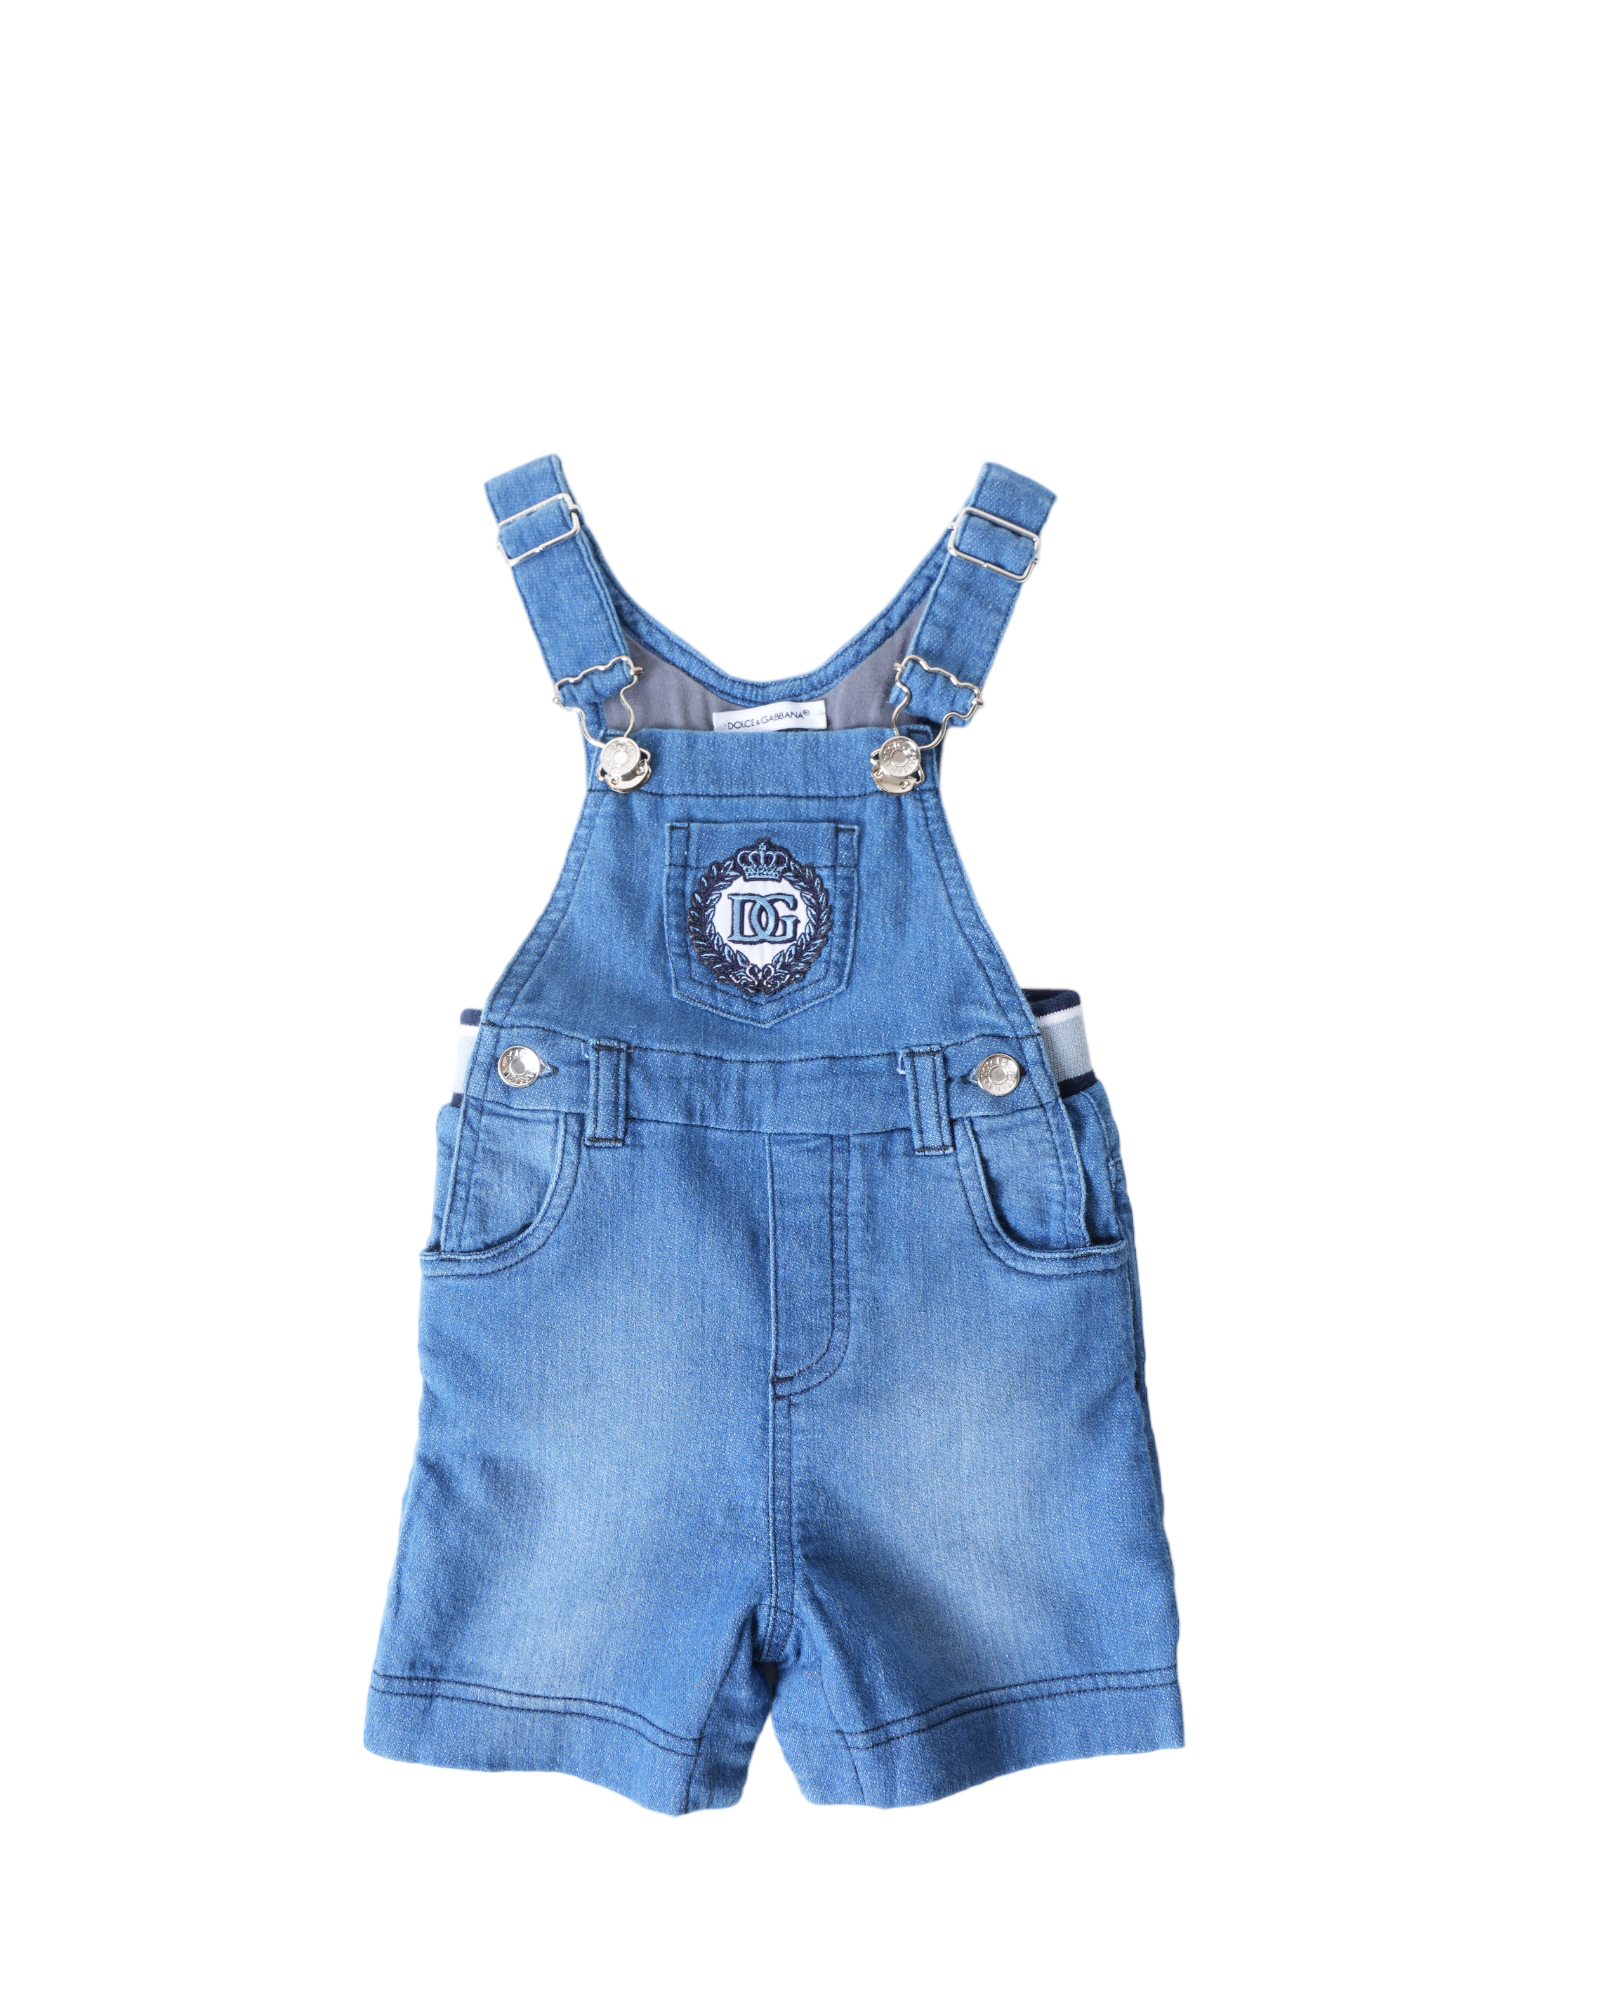 EssCubes Enterprise Dungaree For Baby Boys & Baby Girls Casual Printed Denim  Price in India - Buy EssCubes Enterprise Dungaree For Baby Boys & Baby  Girls Casual Printed Denim online at Flipkart.com